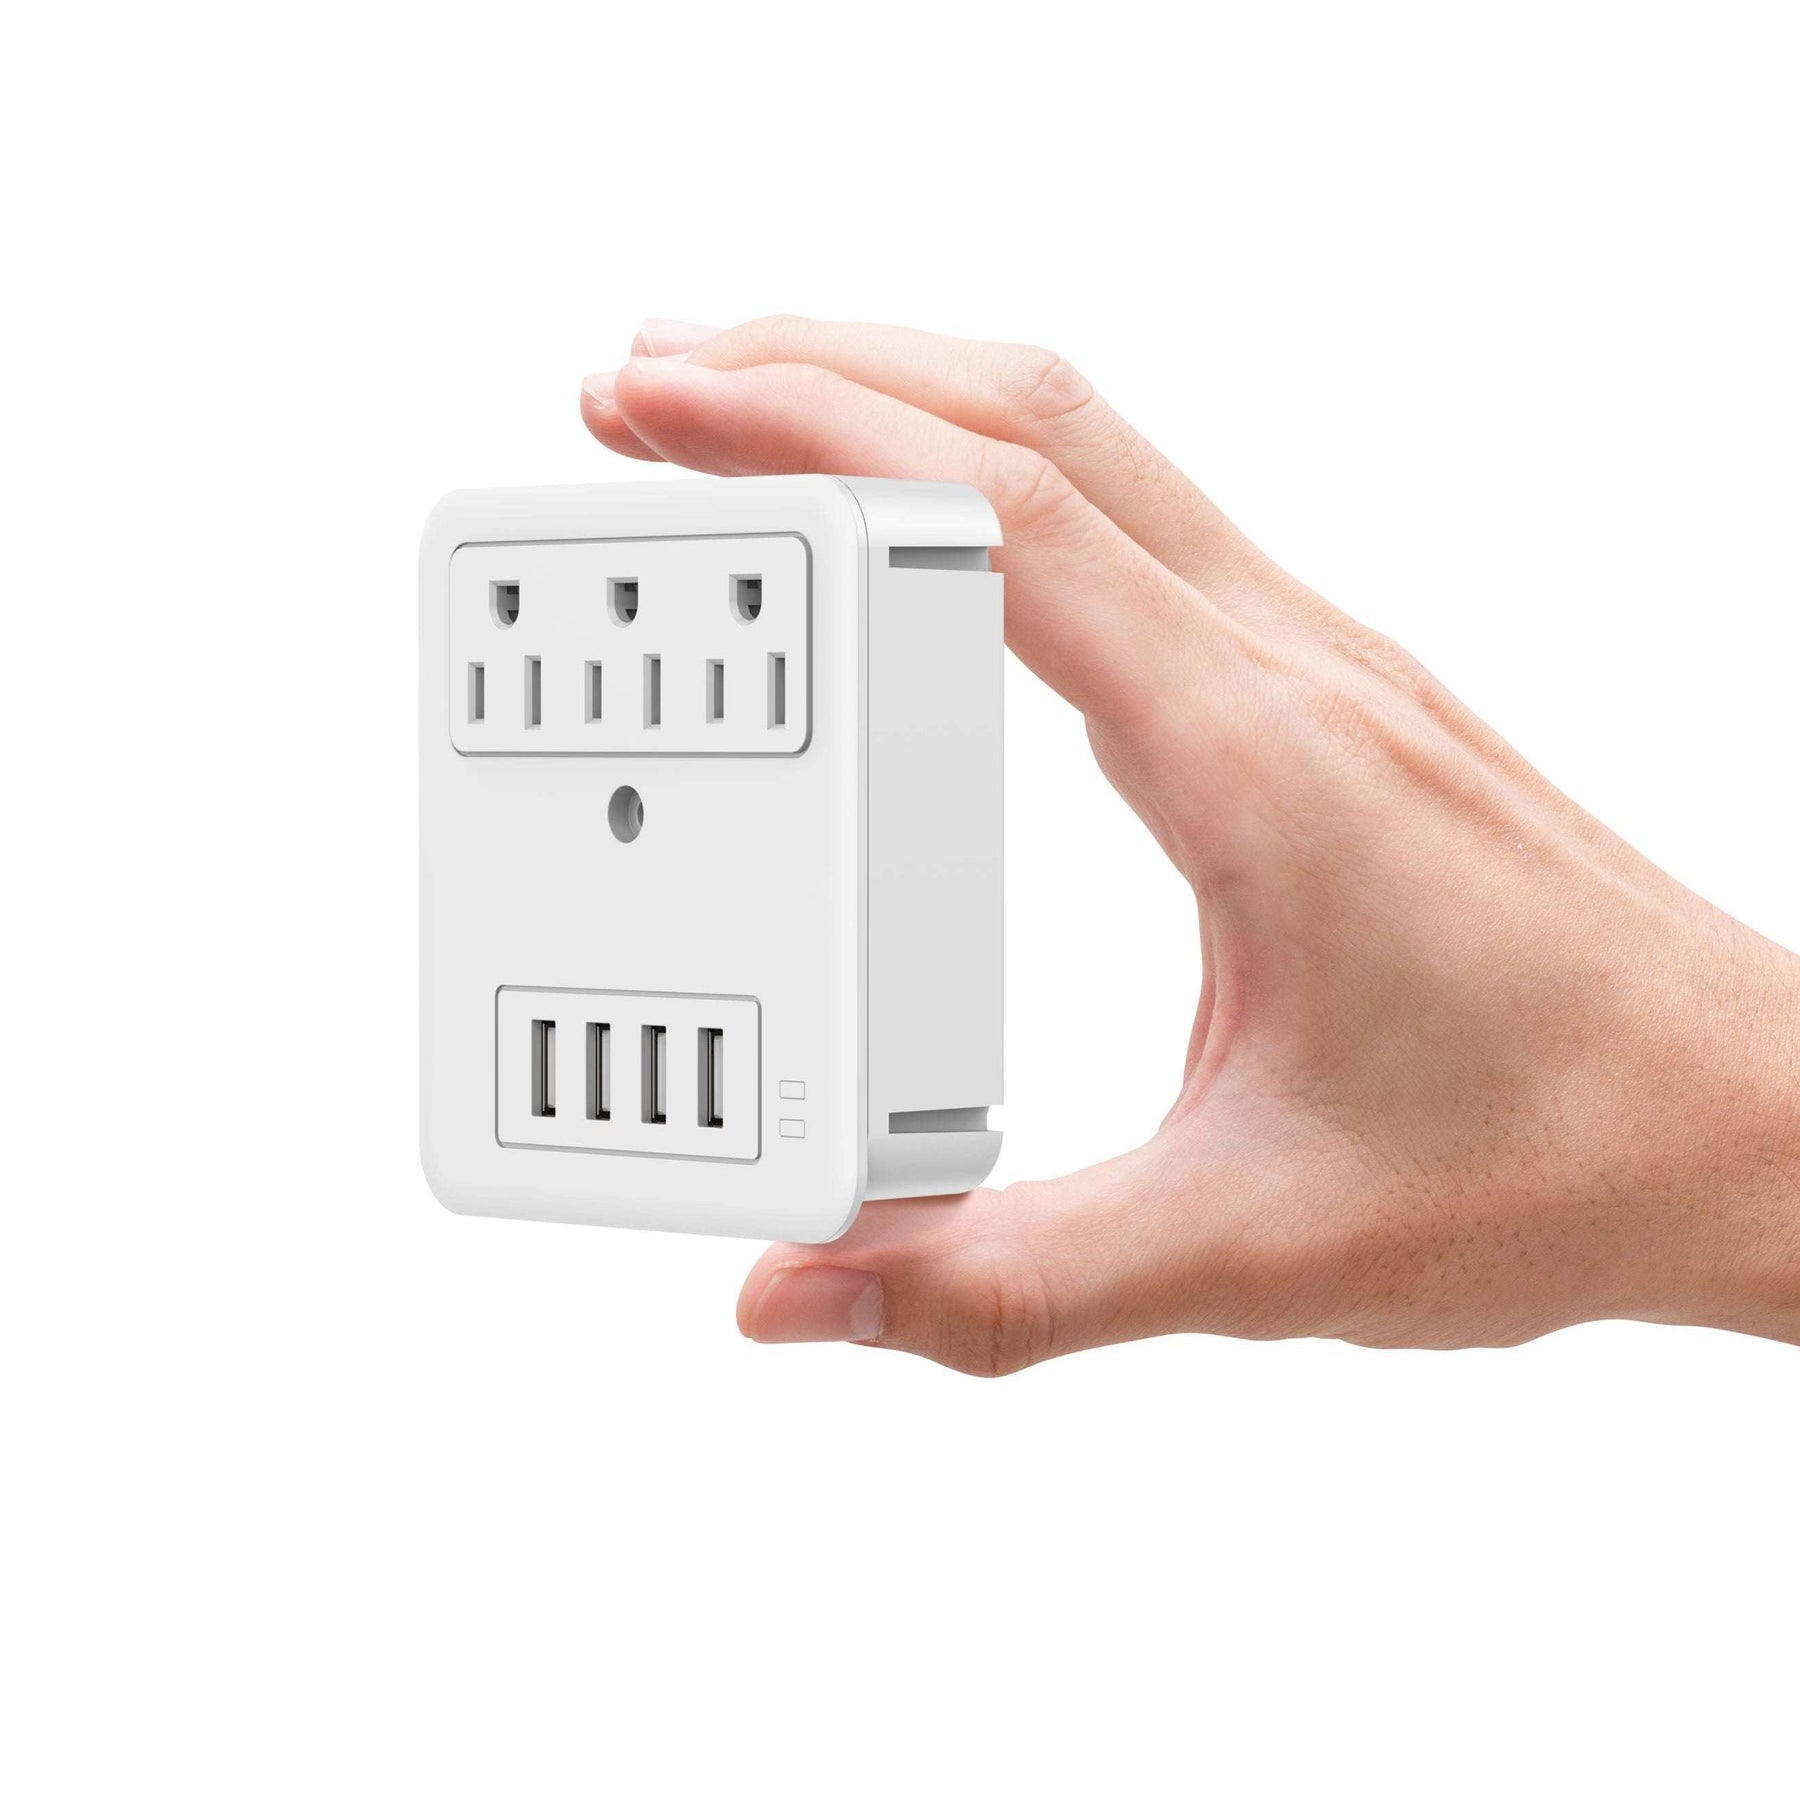 Multi-Plug Surge Protector Wall Adapter - 3 Wall outlets & 4 USB Ports